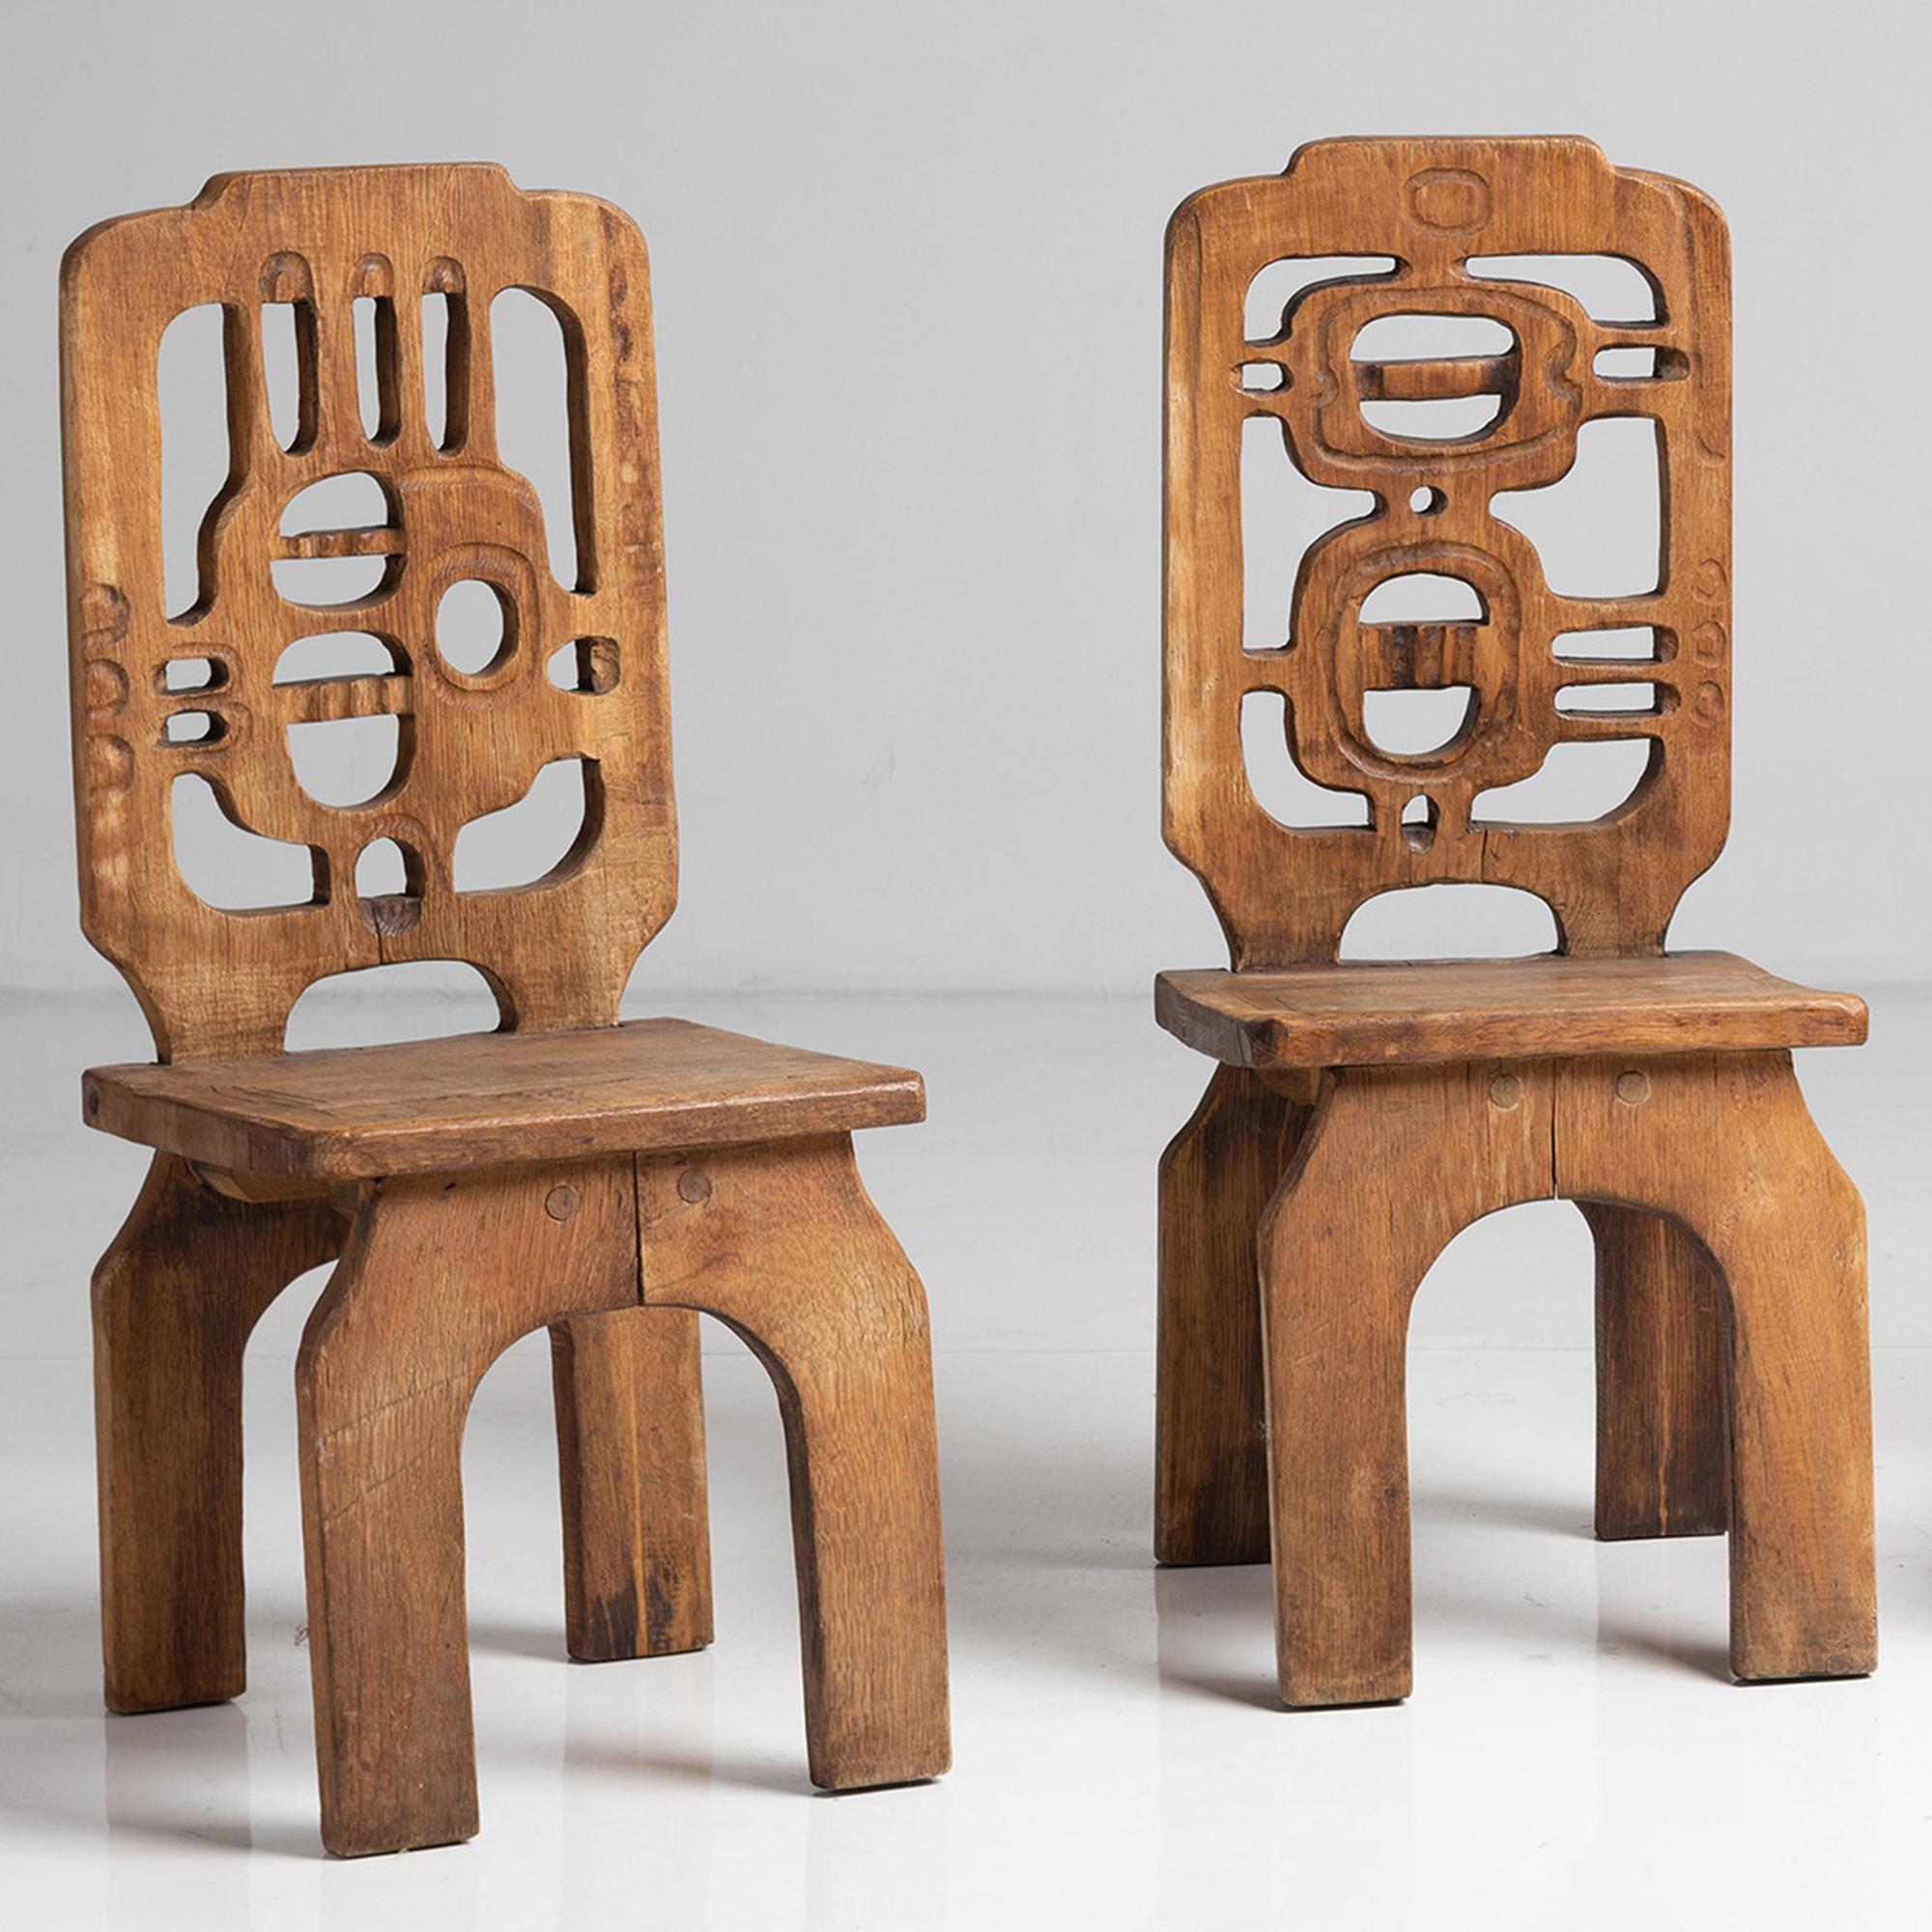 Sculpture chairs by Francesco Pasinato
France Circa 1970
Rare series of oak chairs with carved backrests.